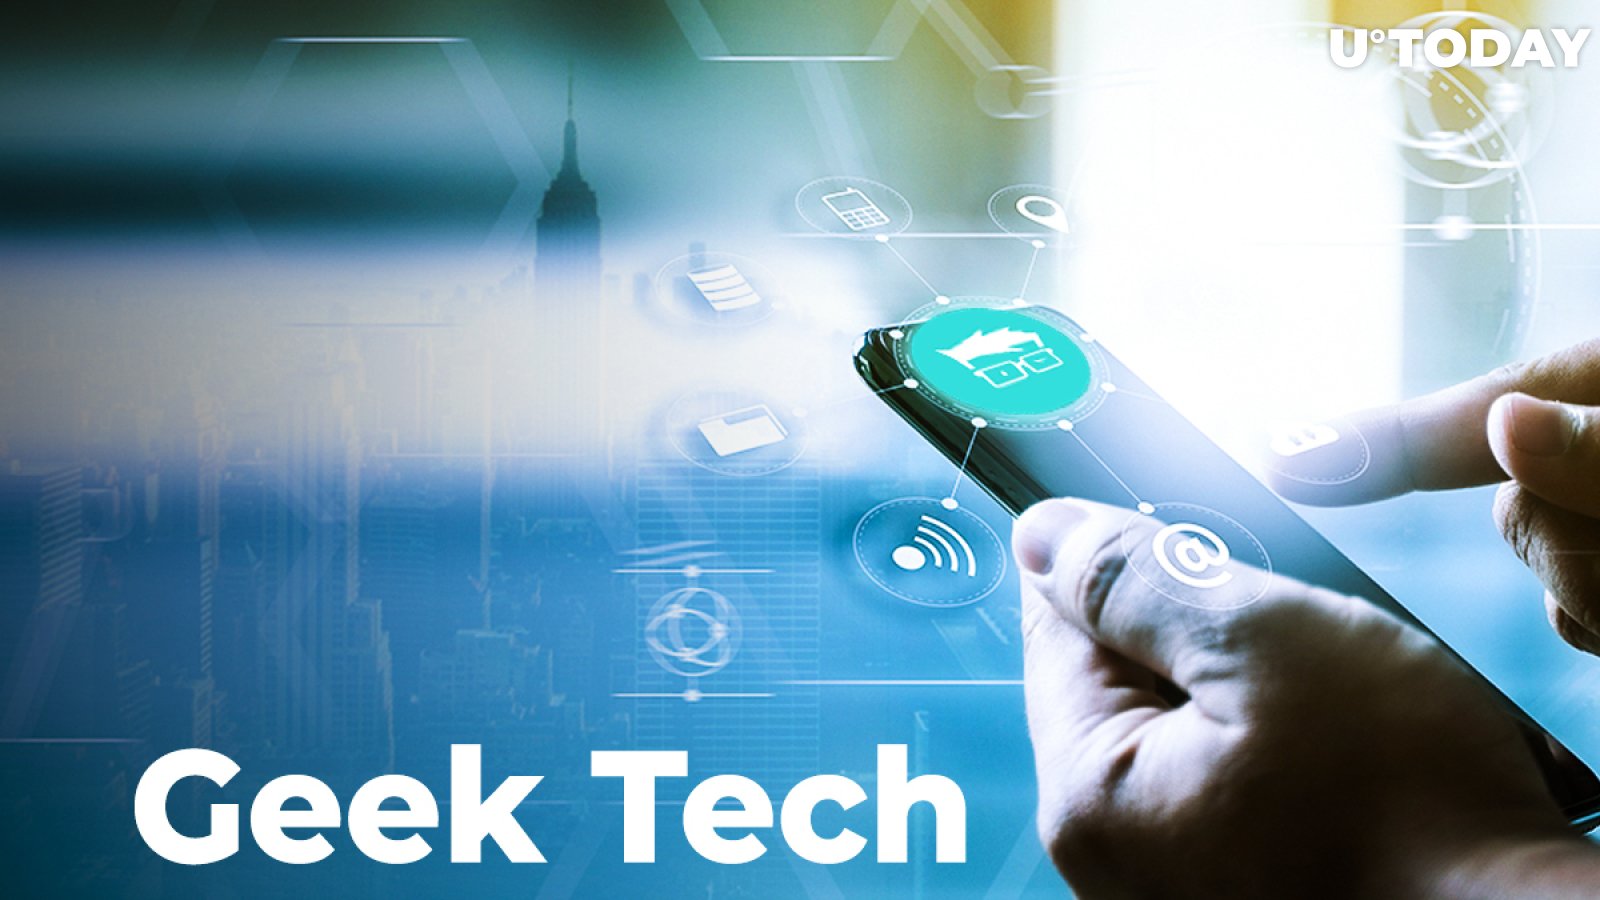 GeekTech News Application Adds U.Today Newsfeed on Crypto and Blockchain